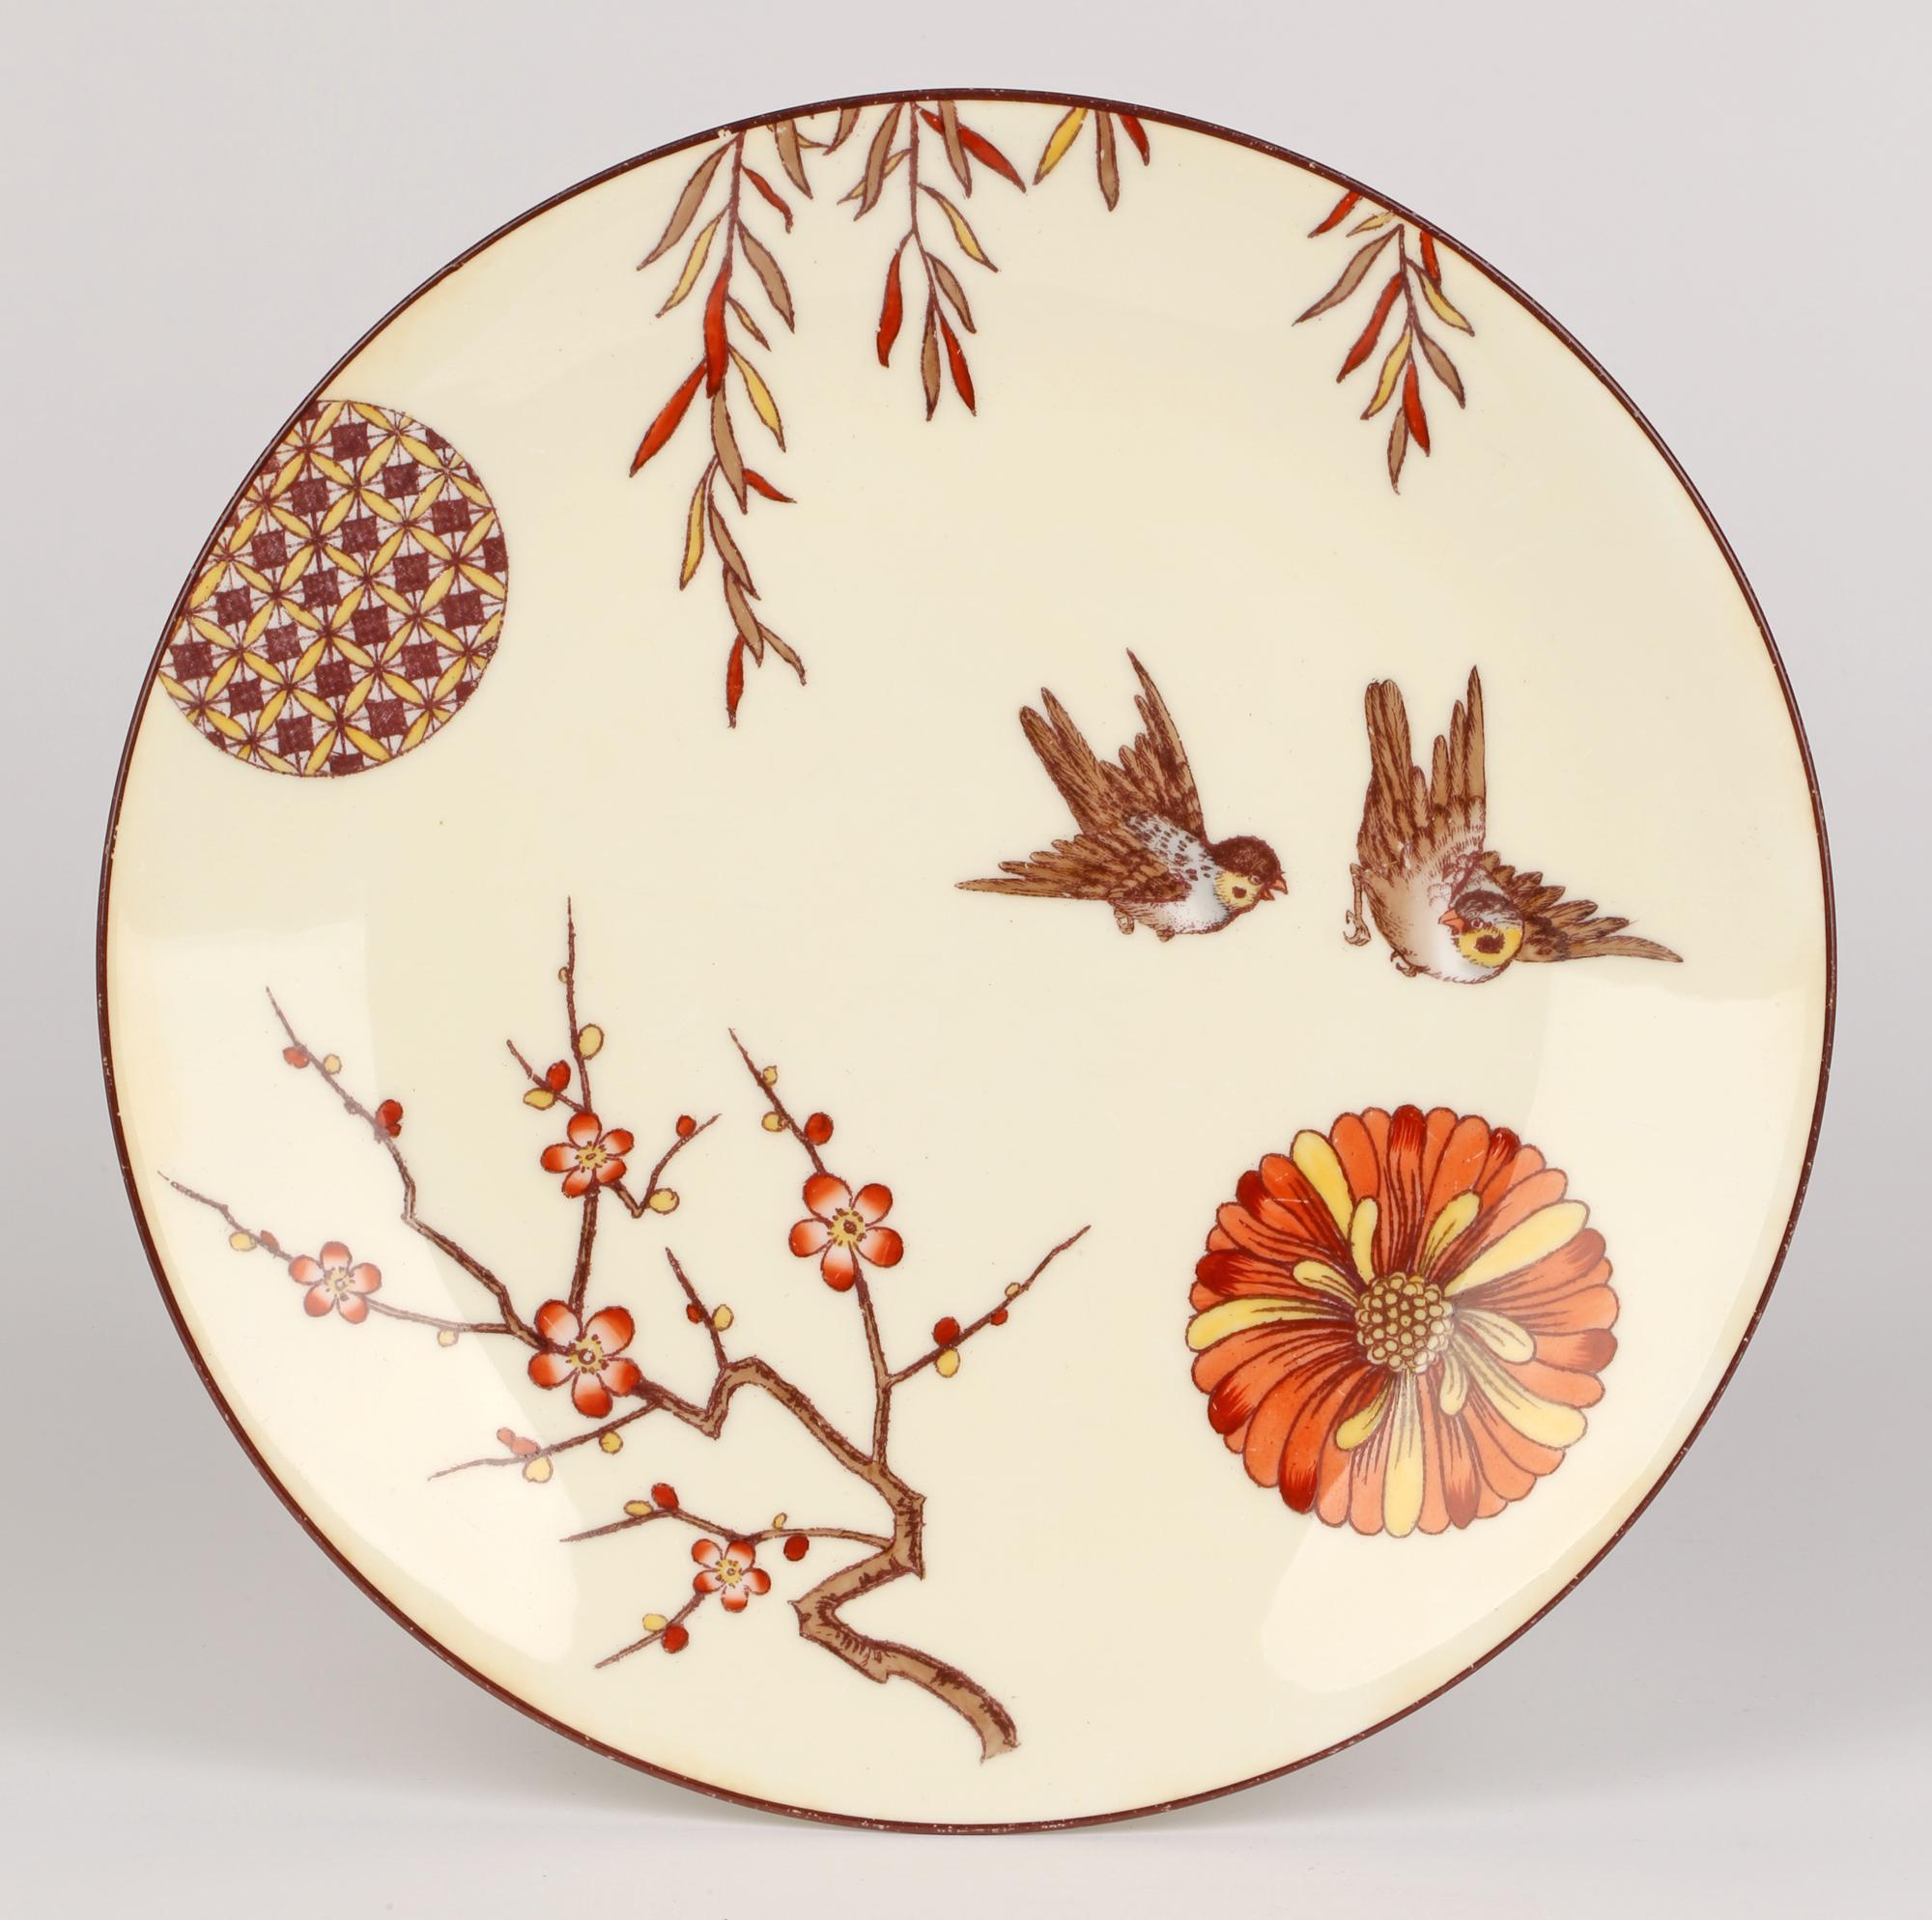 Minton Porcelain Cabinet Plate Attributed to Christopher Dresser, 1880 For Sale 8